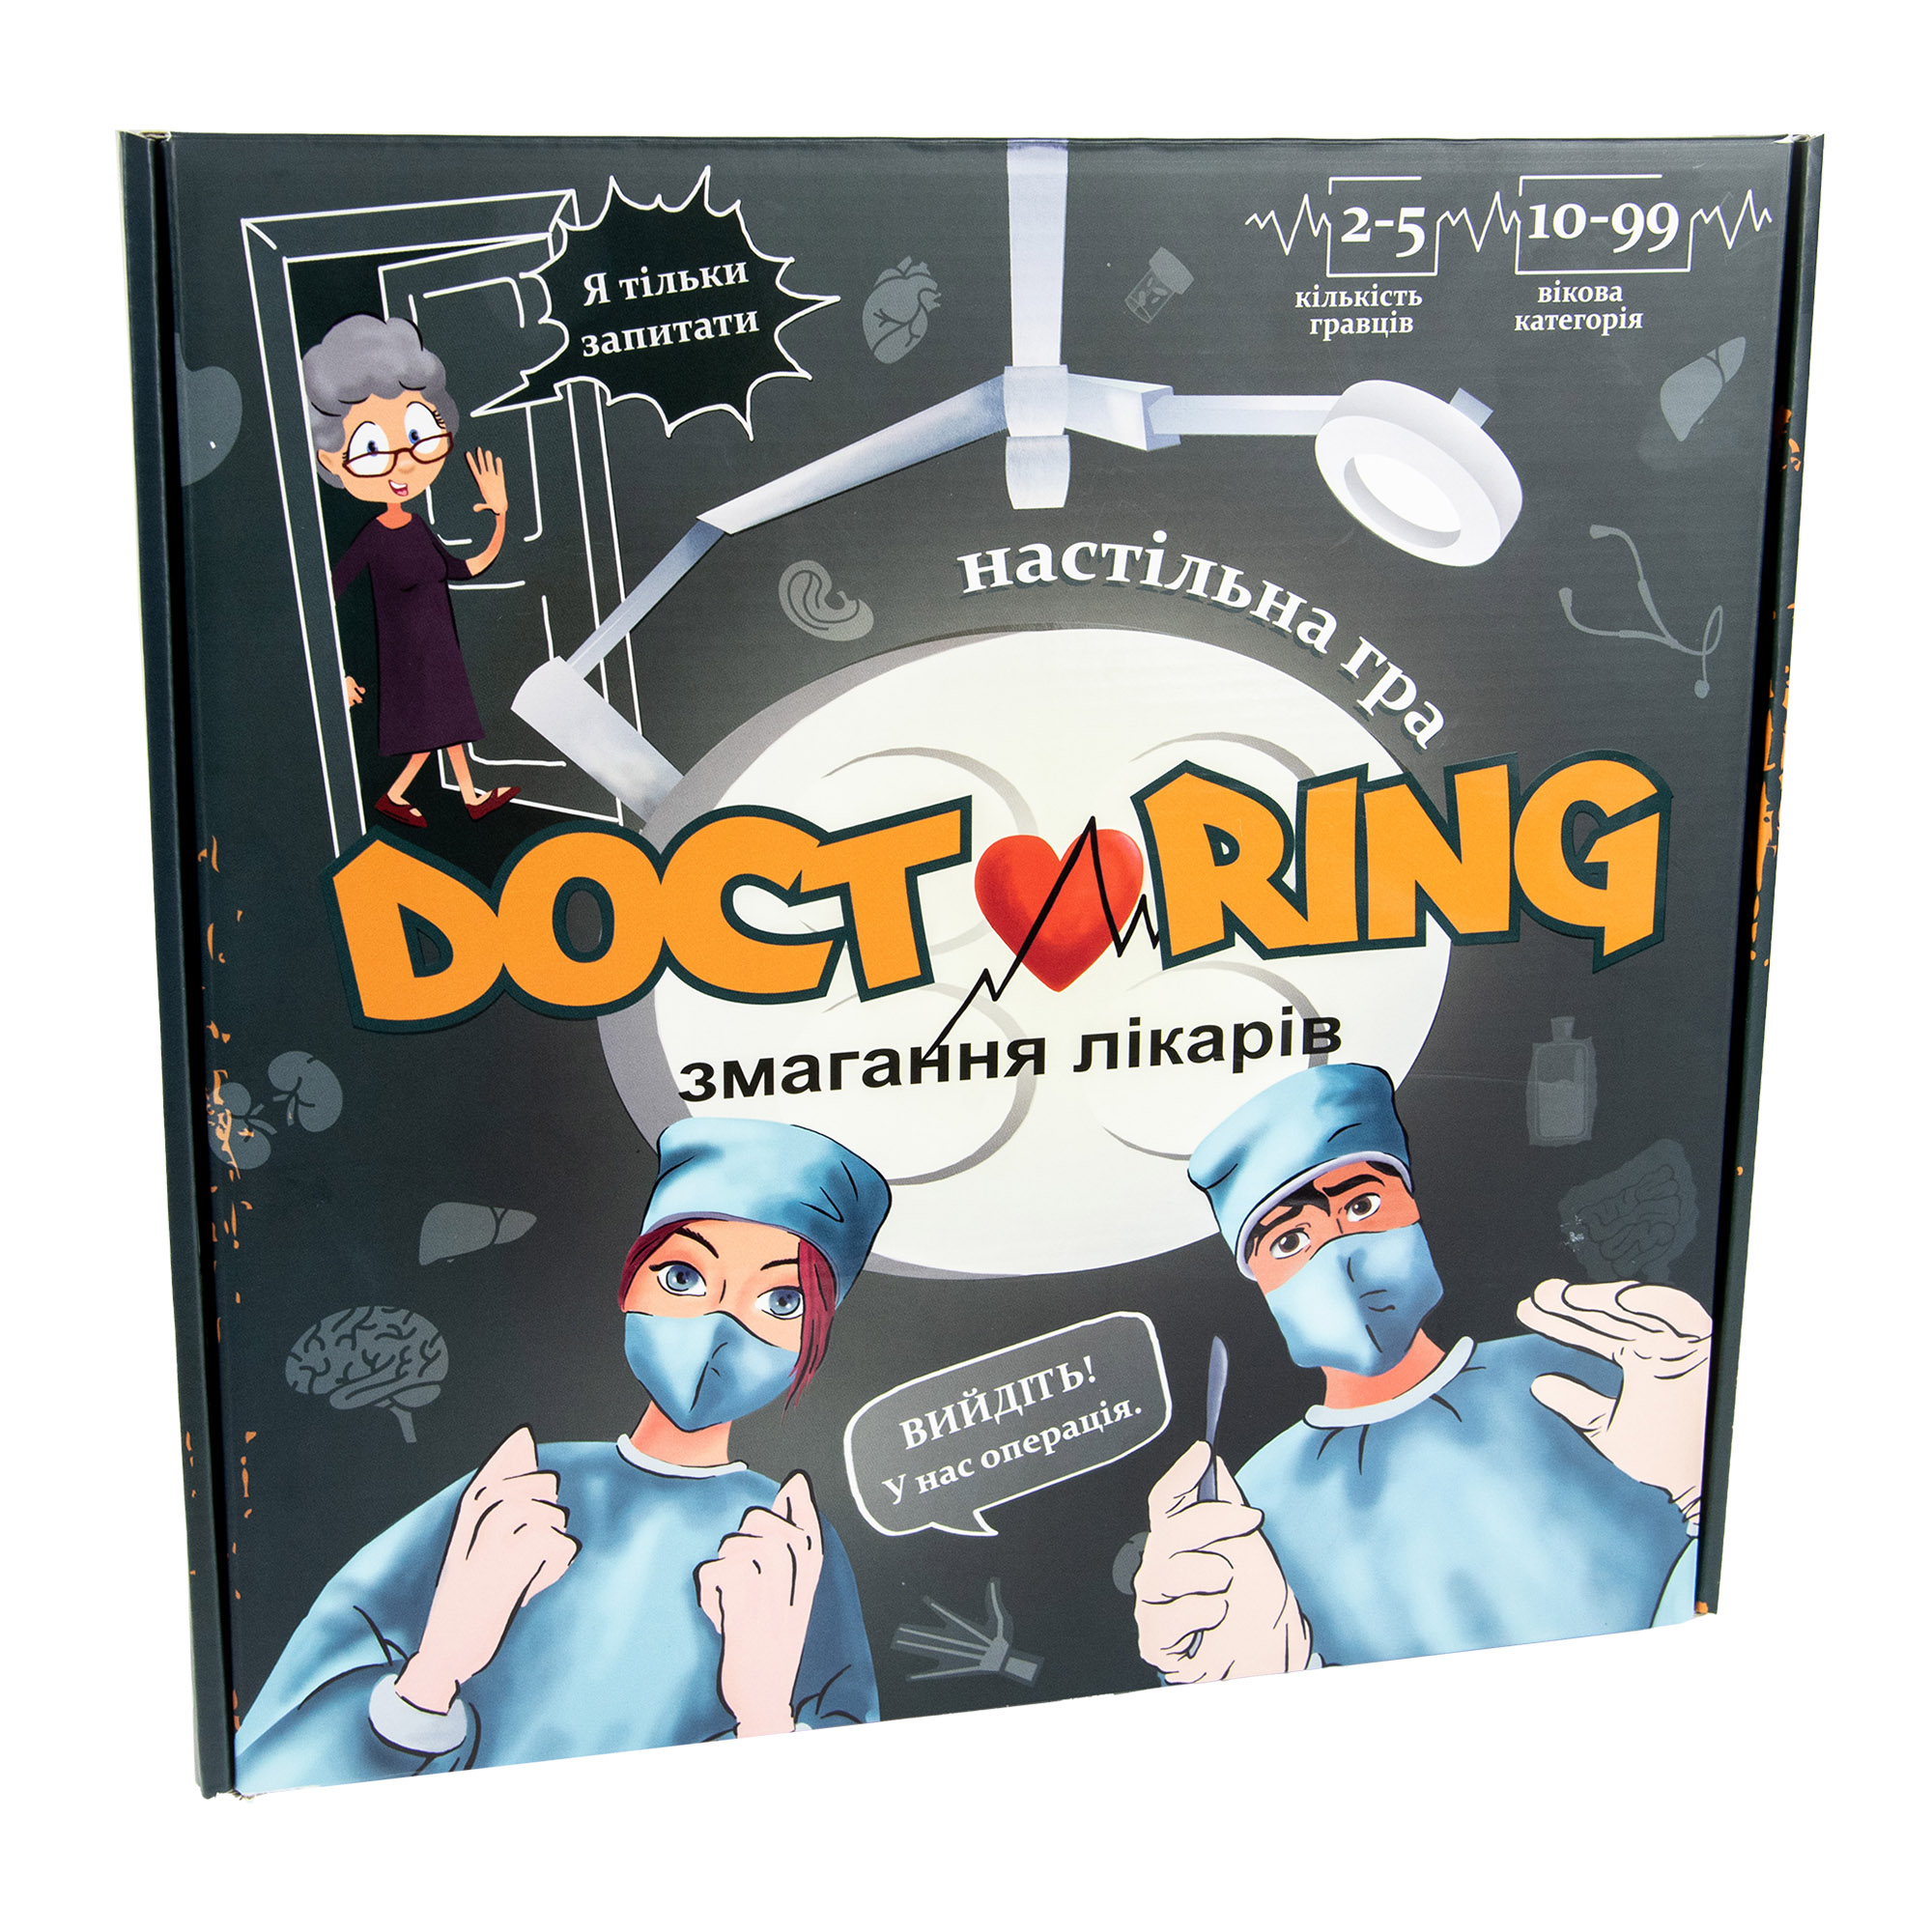 Board game 30916 (ukr) "Doctoring - competition of doctors", in a box of 33-32-4,2 cm